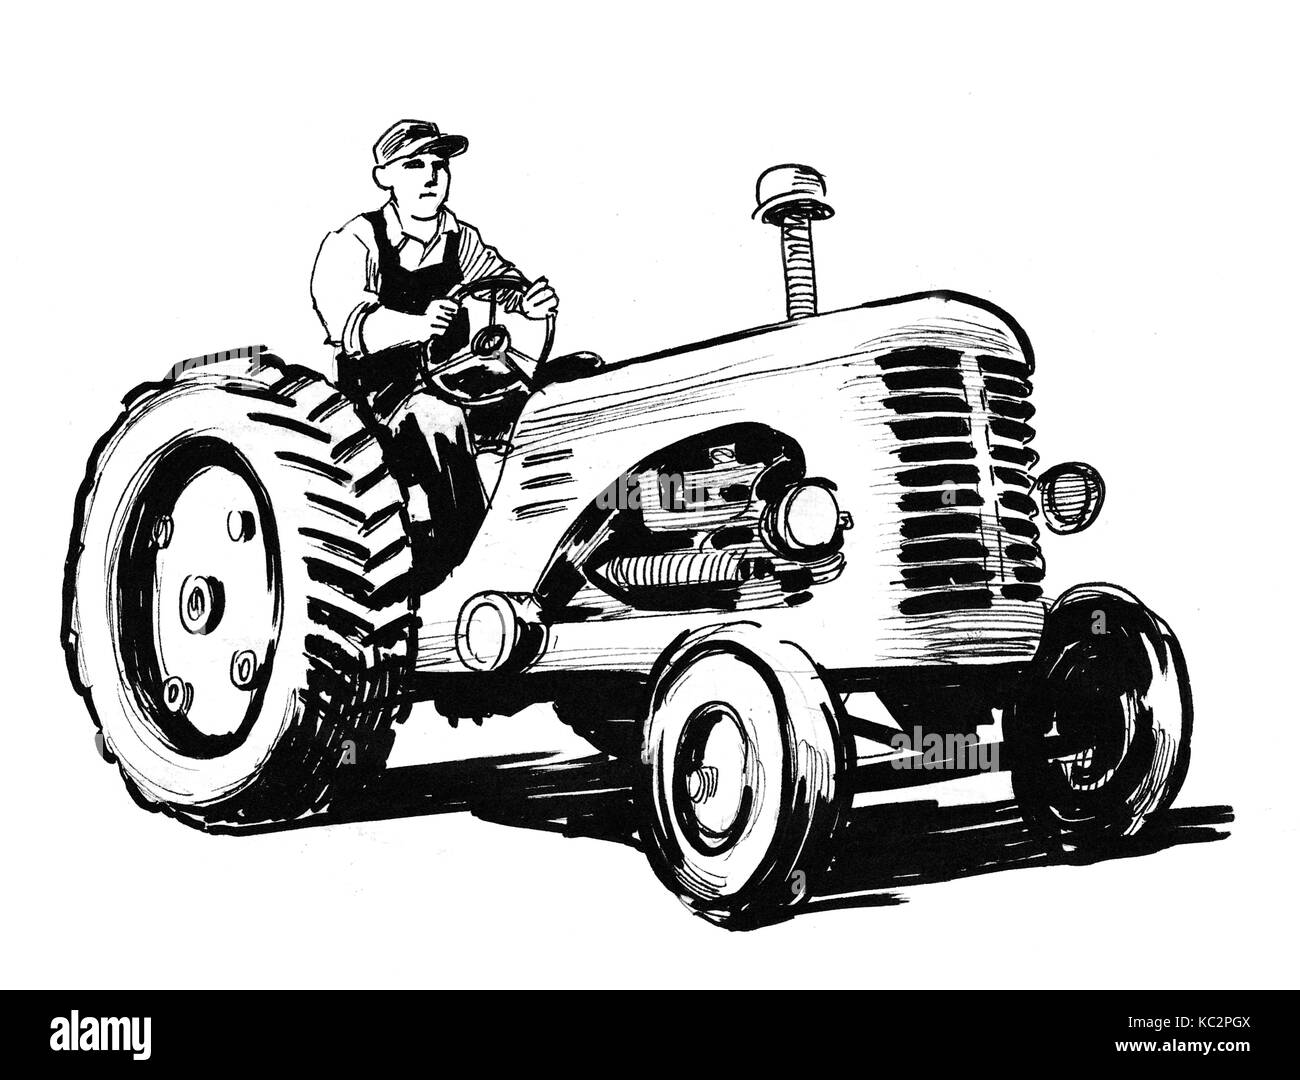 Farmer on retro tractor. Ink black and white illustration Stock Photo